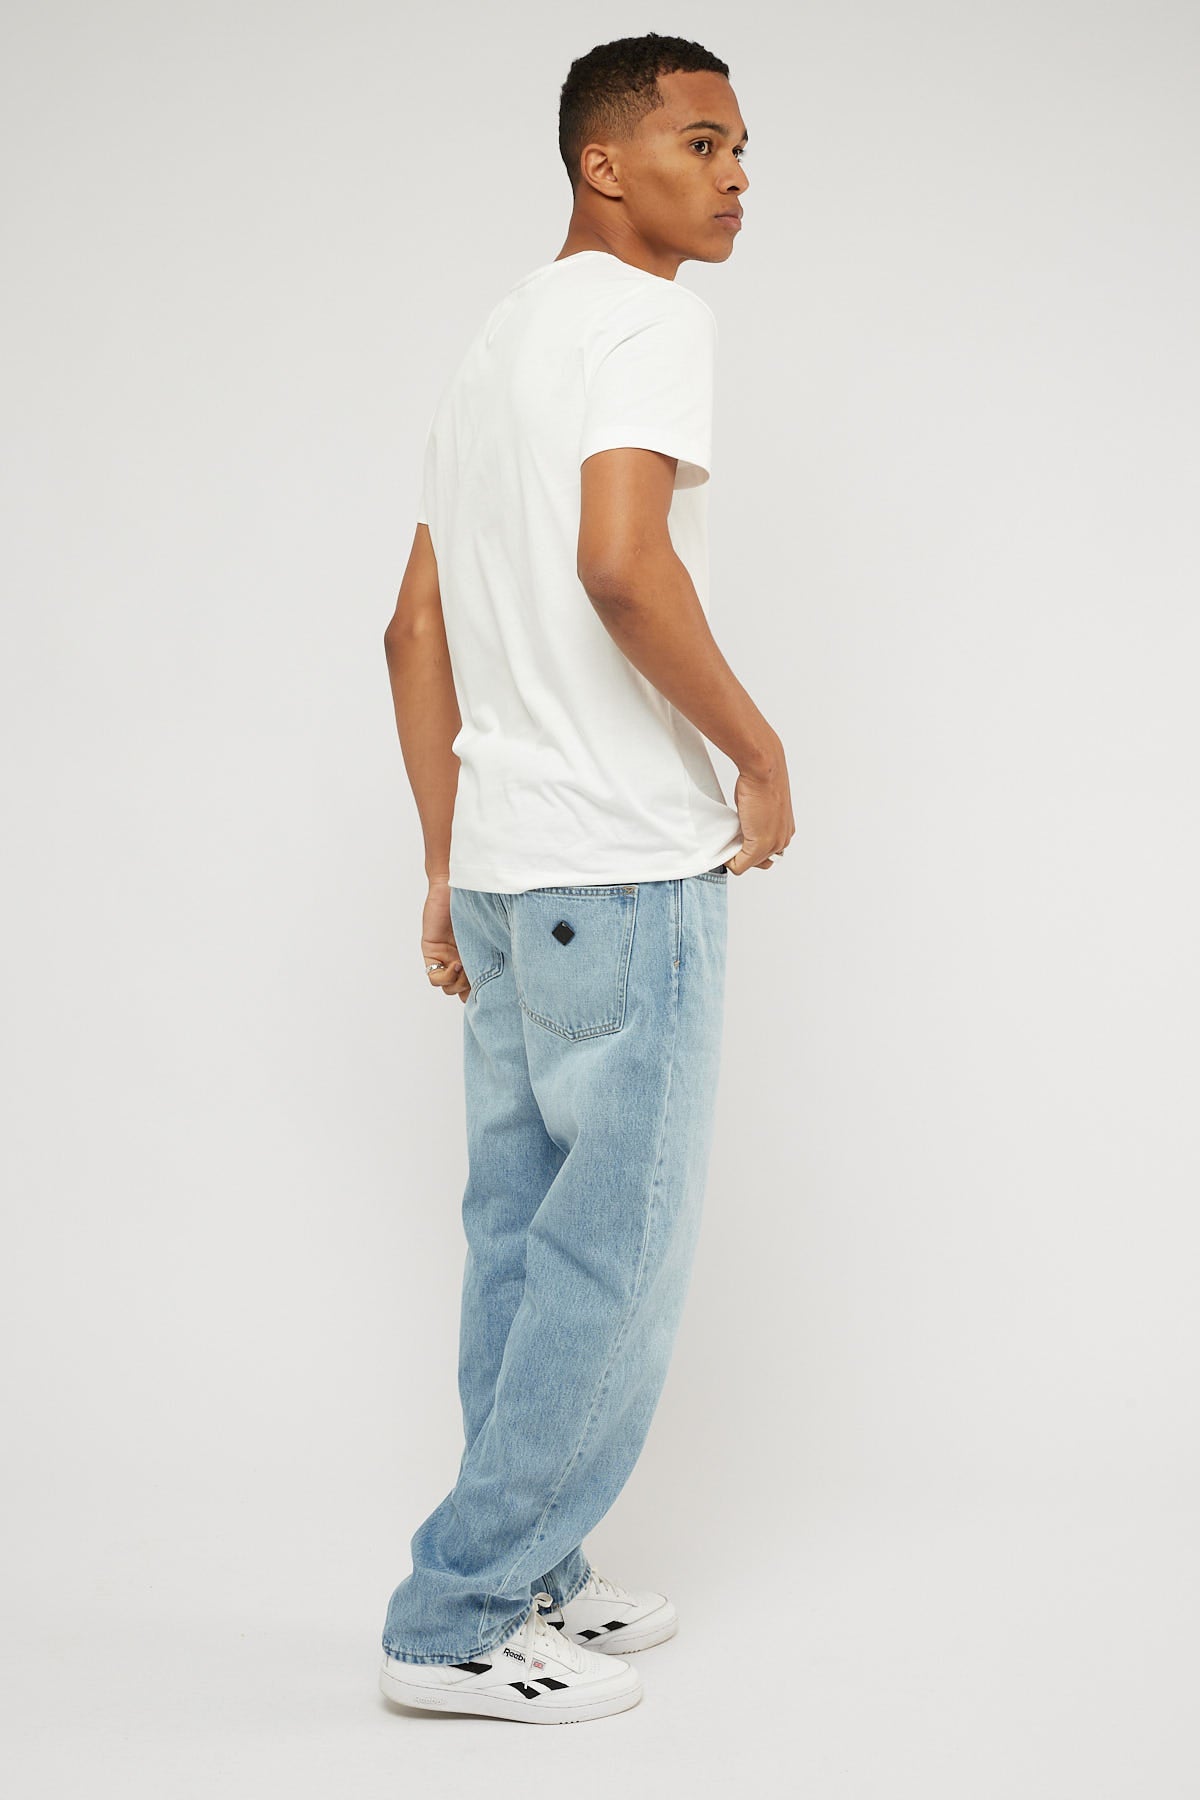 Abrand A 95 Baggy Jean Nevermind